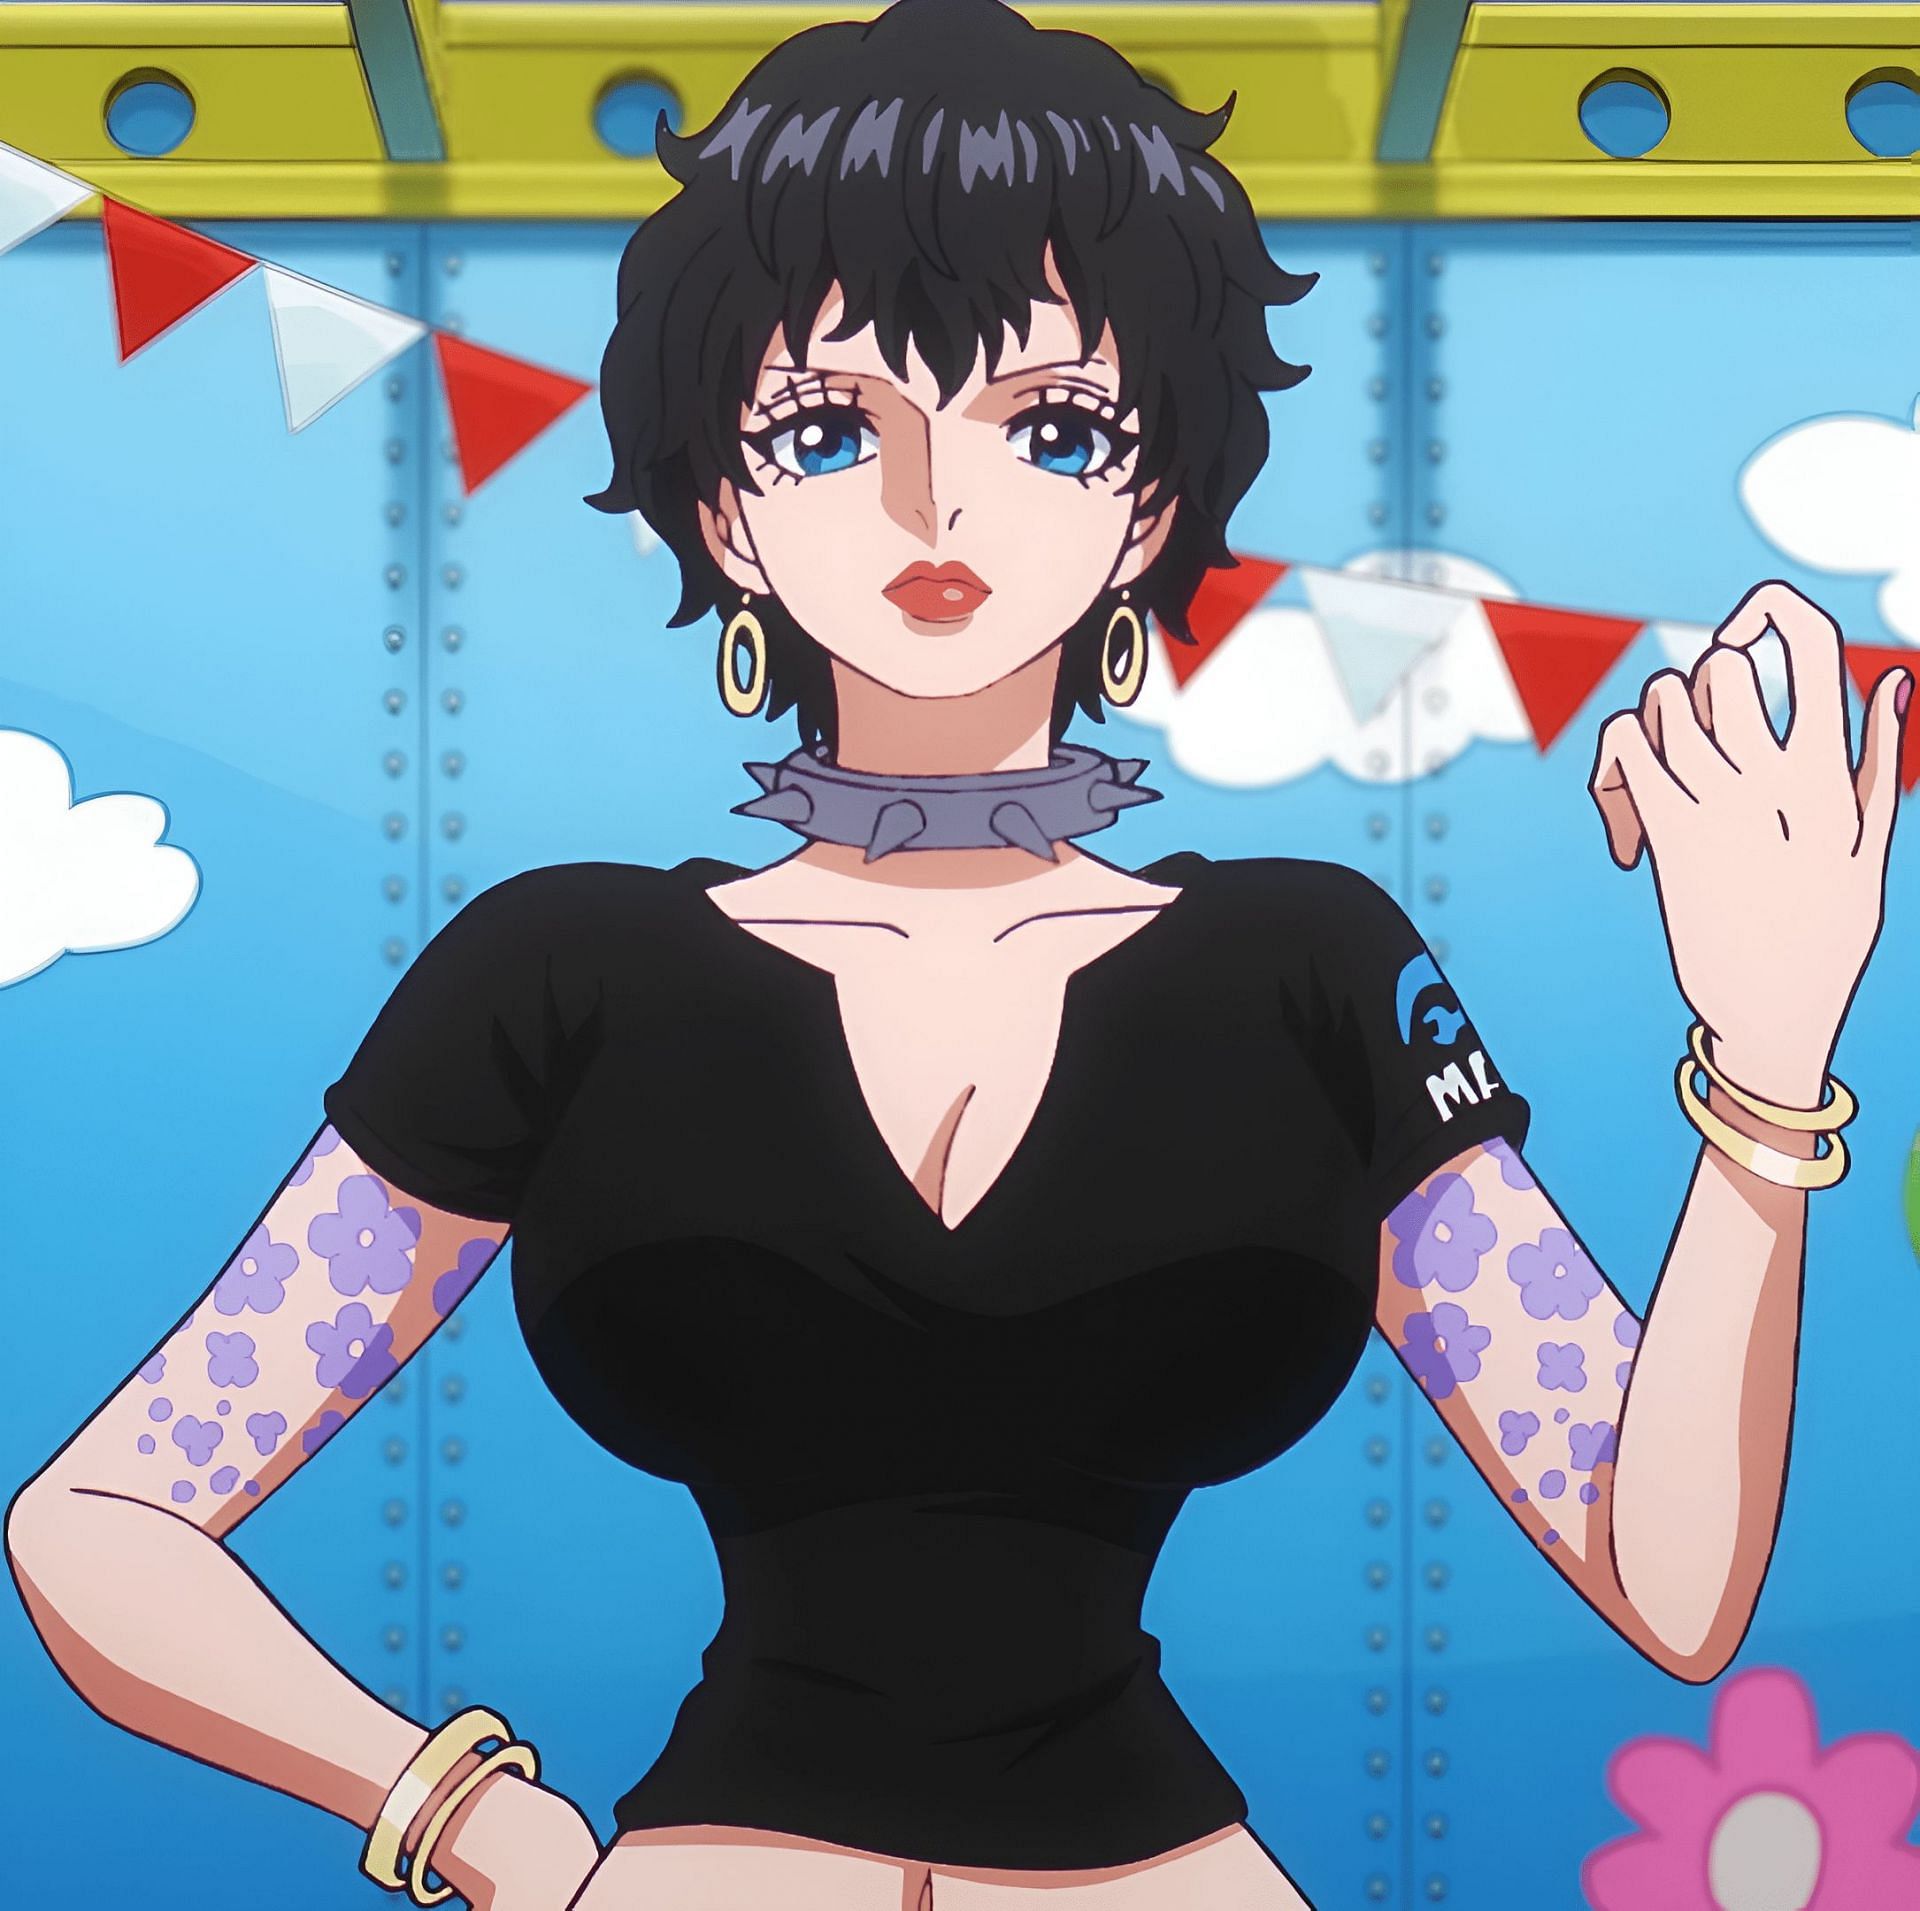 Vice Admiral Doll as seen in the anime (Image via Toei animation)